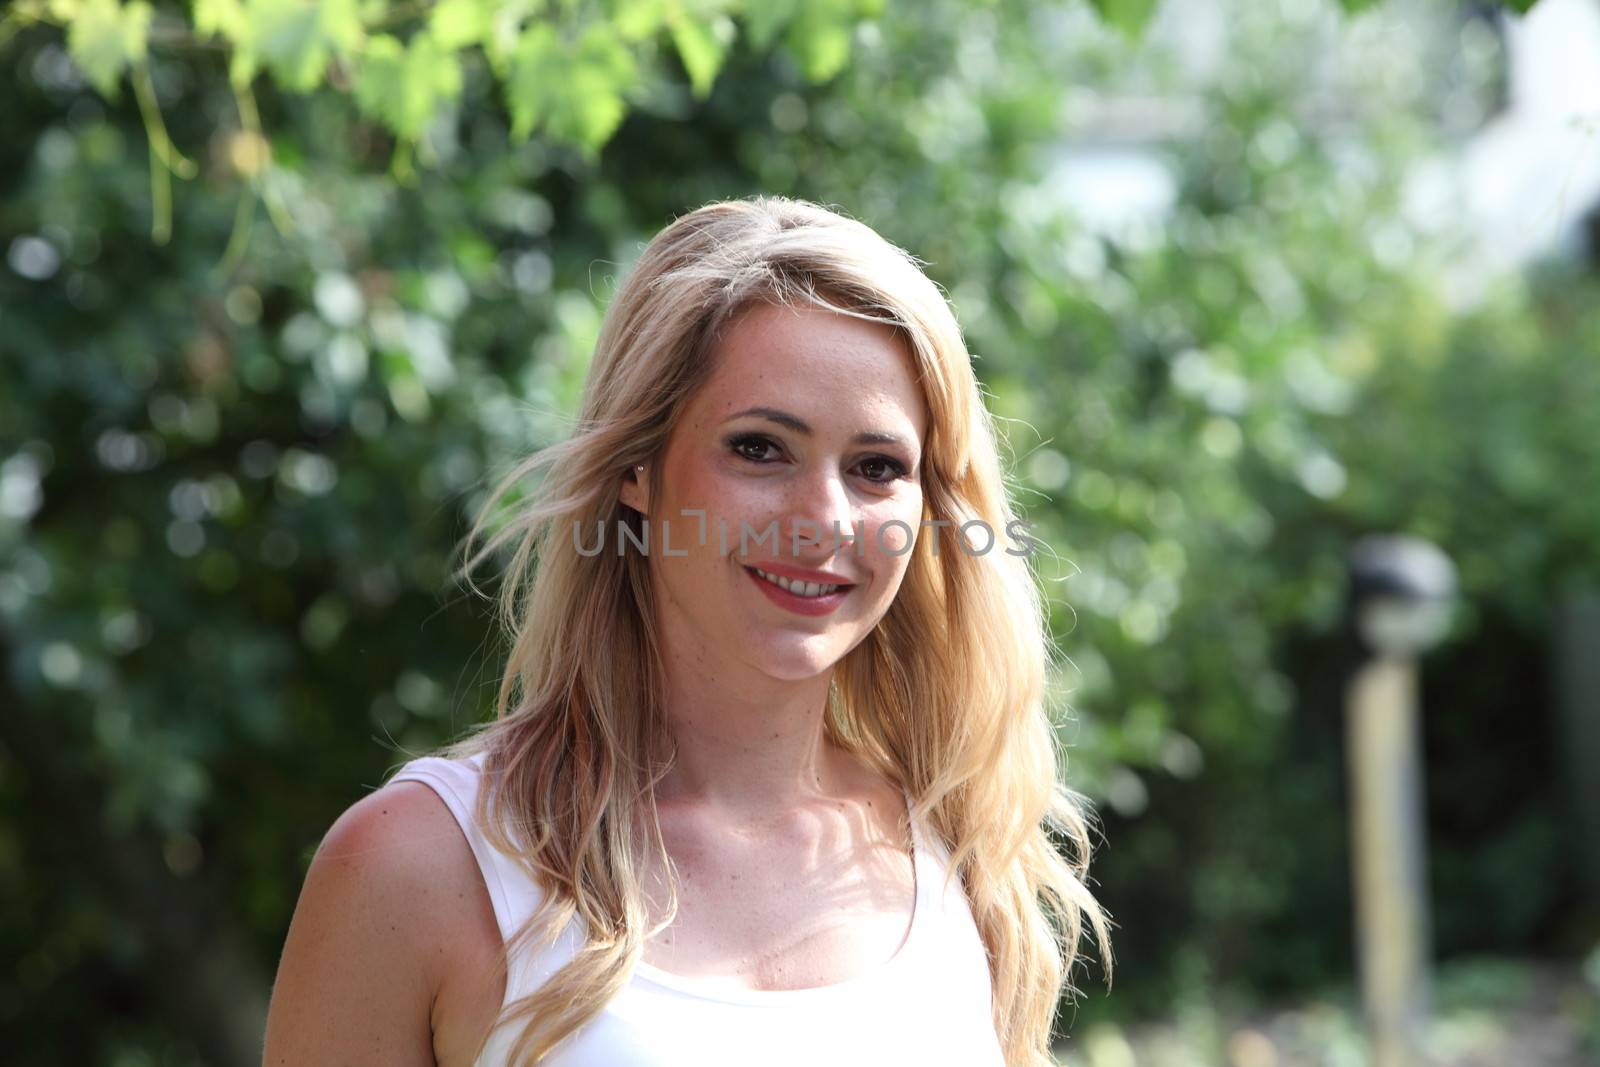 Attractive blond woman in the garden standing looking at the camera with a smile as she enjoys the summer sunshine